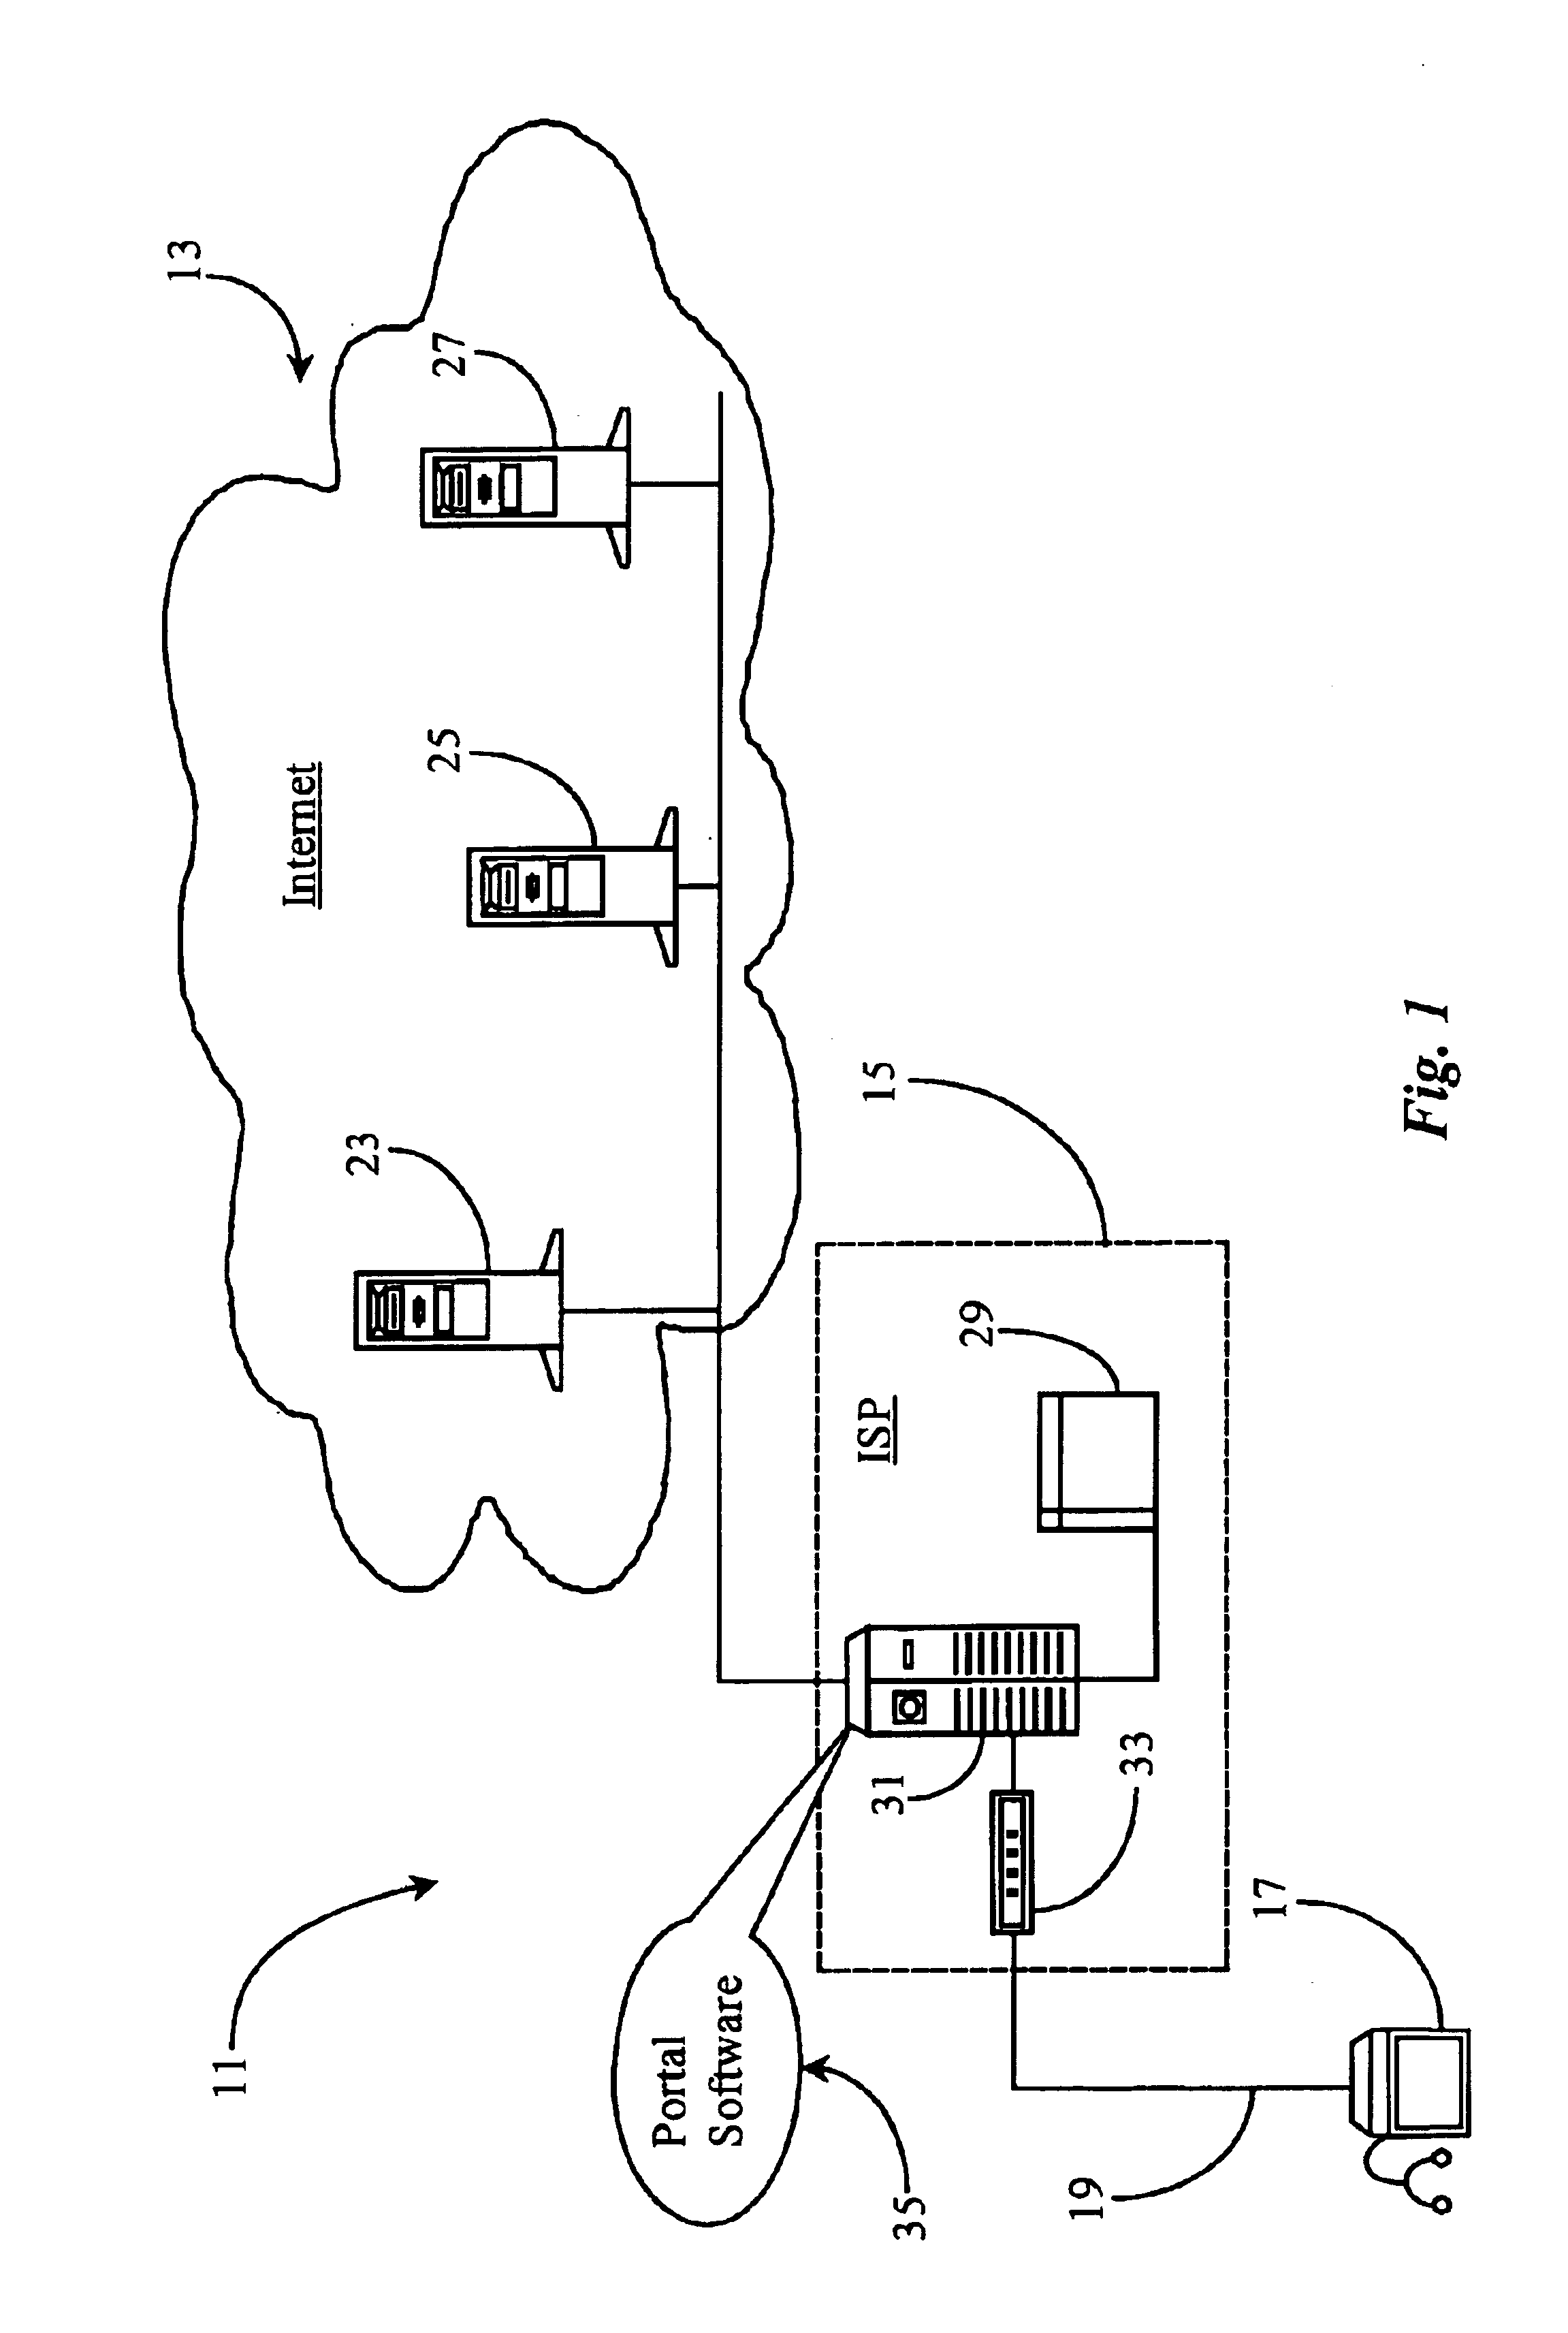 Method and apparatus for tracking functional states of a web-site and reporting results to web developers